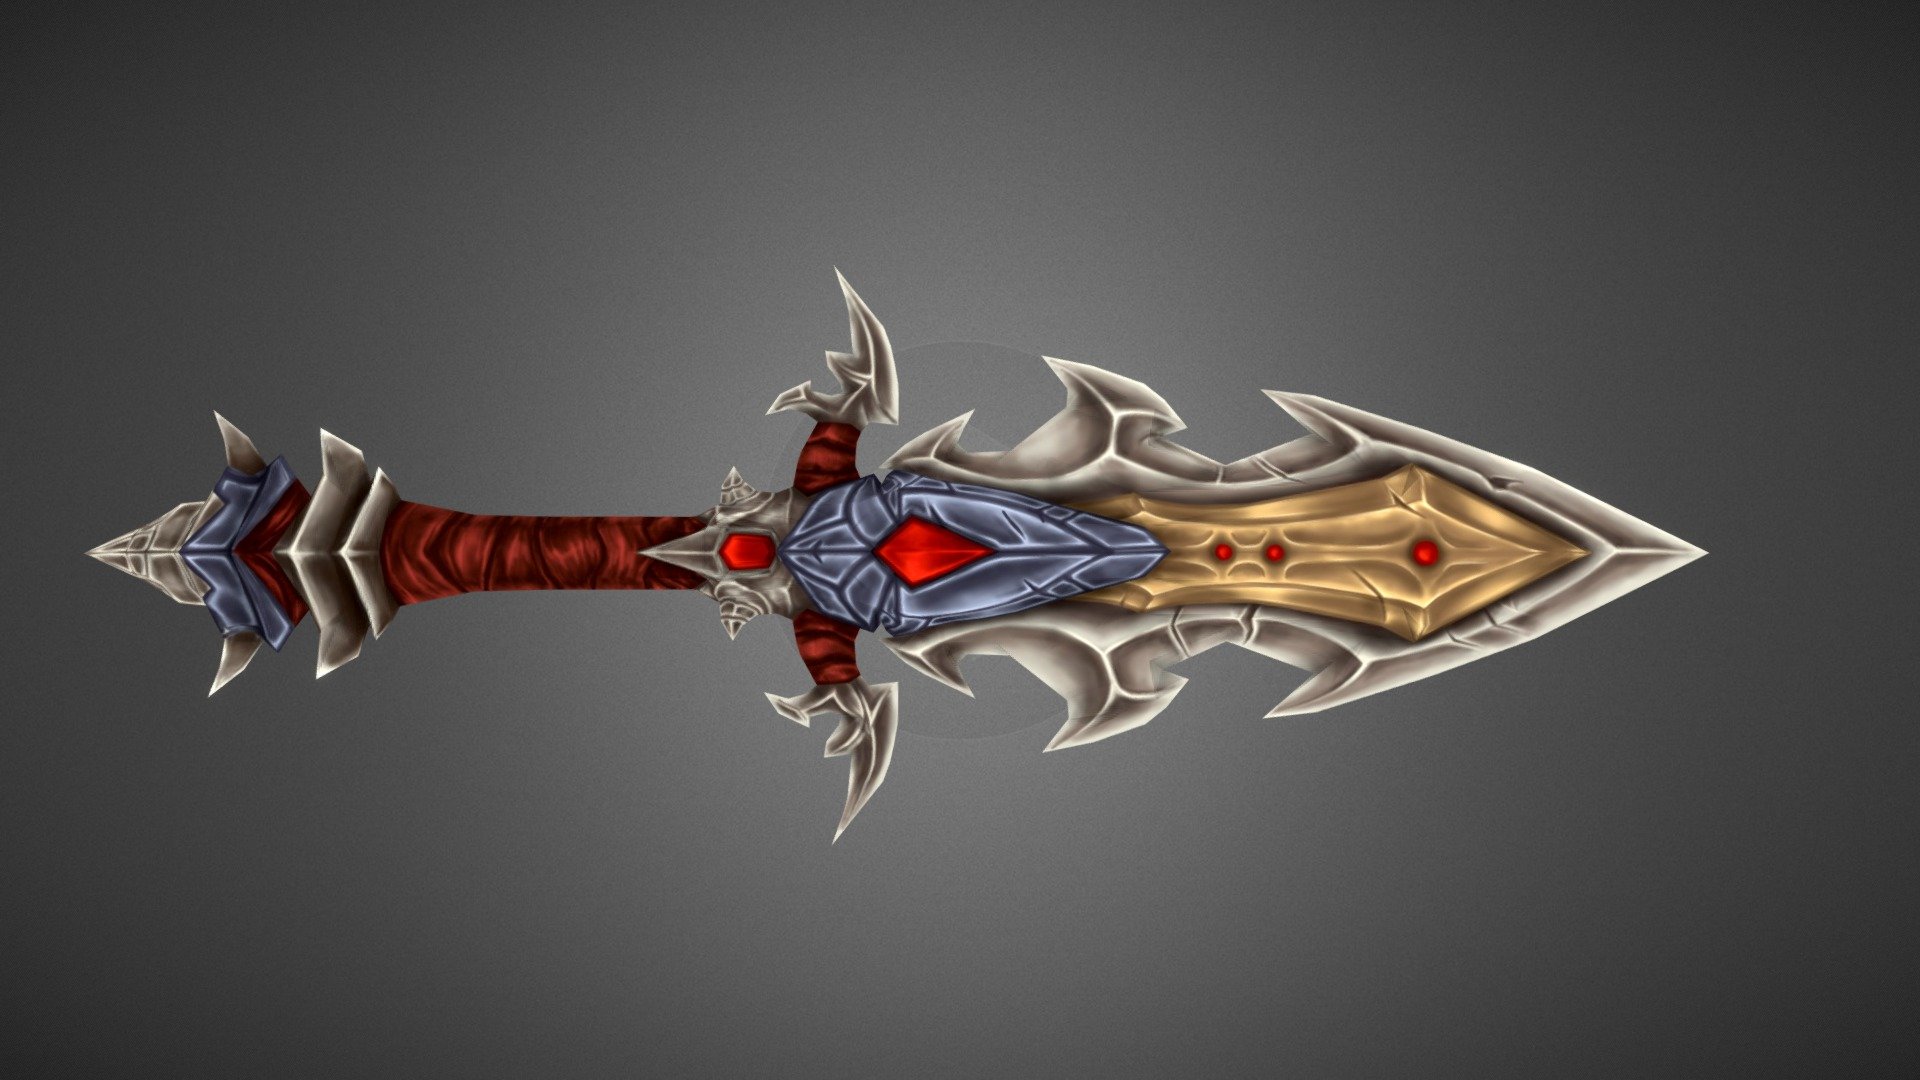 I made this weapon inspired in the amazing concept art of Kelvin Tan Pvp Weapon Set of Cataclysm. Just wanted to learn about Blender and Substance Painter. 

Link to the Concept: https://www.artstation.com/artwork/WleG

Cheers! - WoW Pvp Weapon - Cataclysm - 3D model by Nico Araujo (@nicoaraujo) 3d model